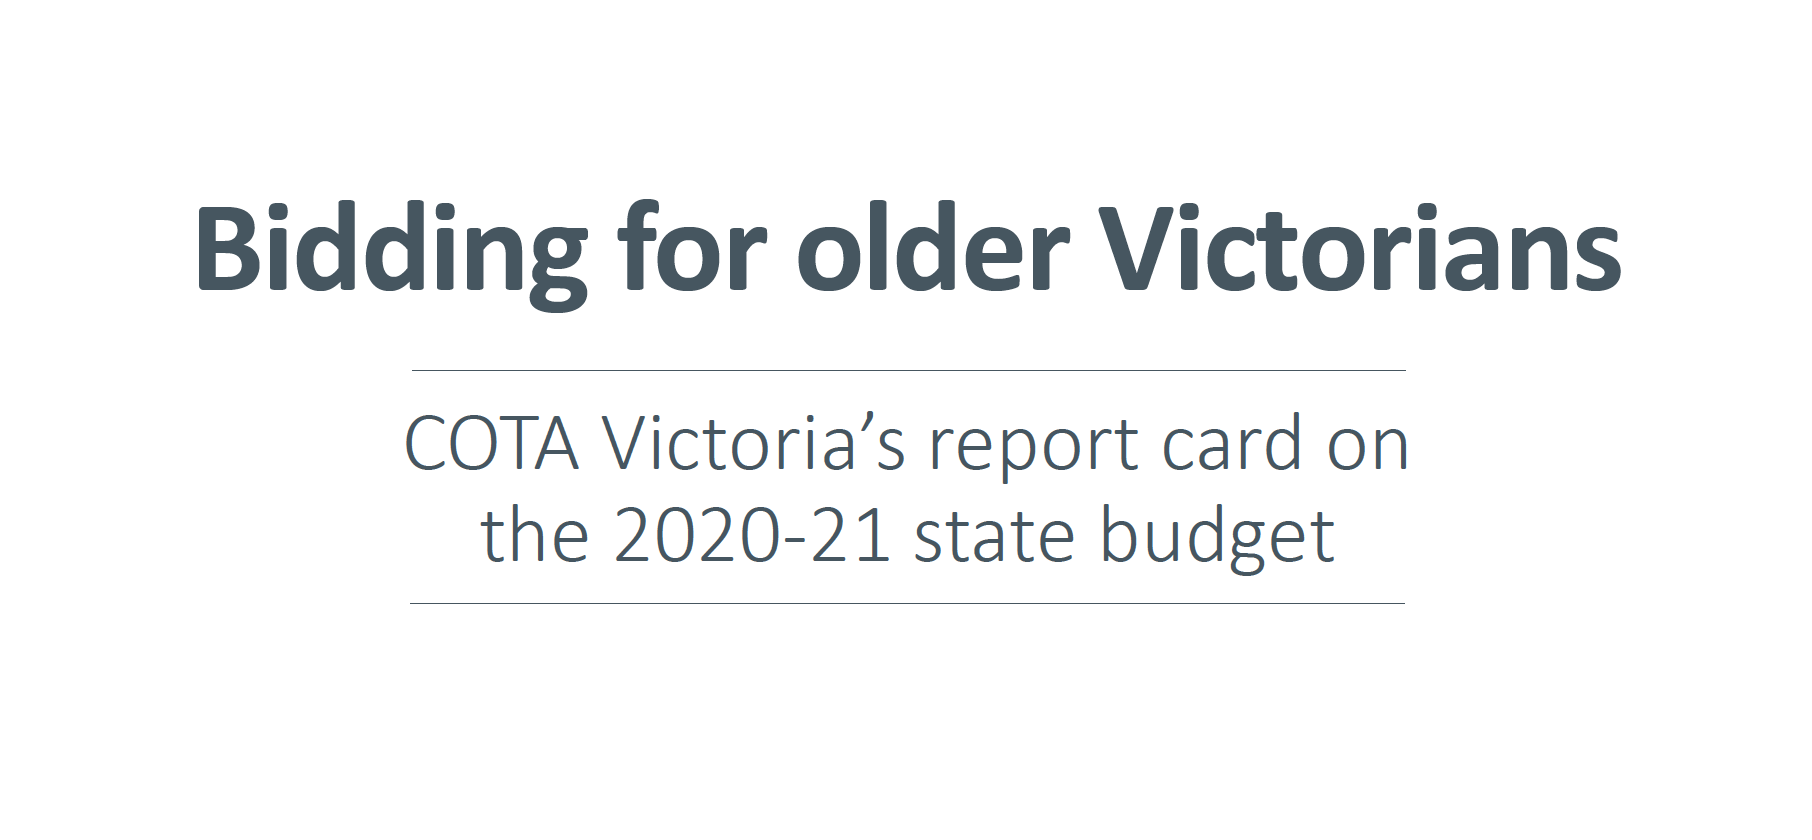 Bidding for older Victorians: COTA Victoria's report card on the 2020-21 state budget,